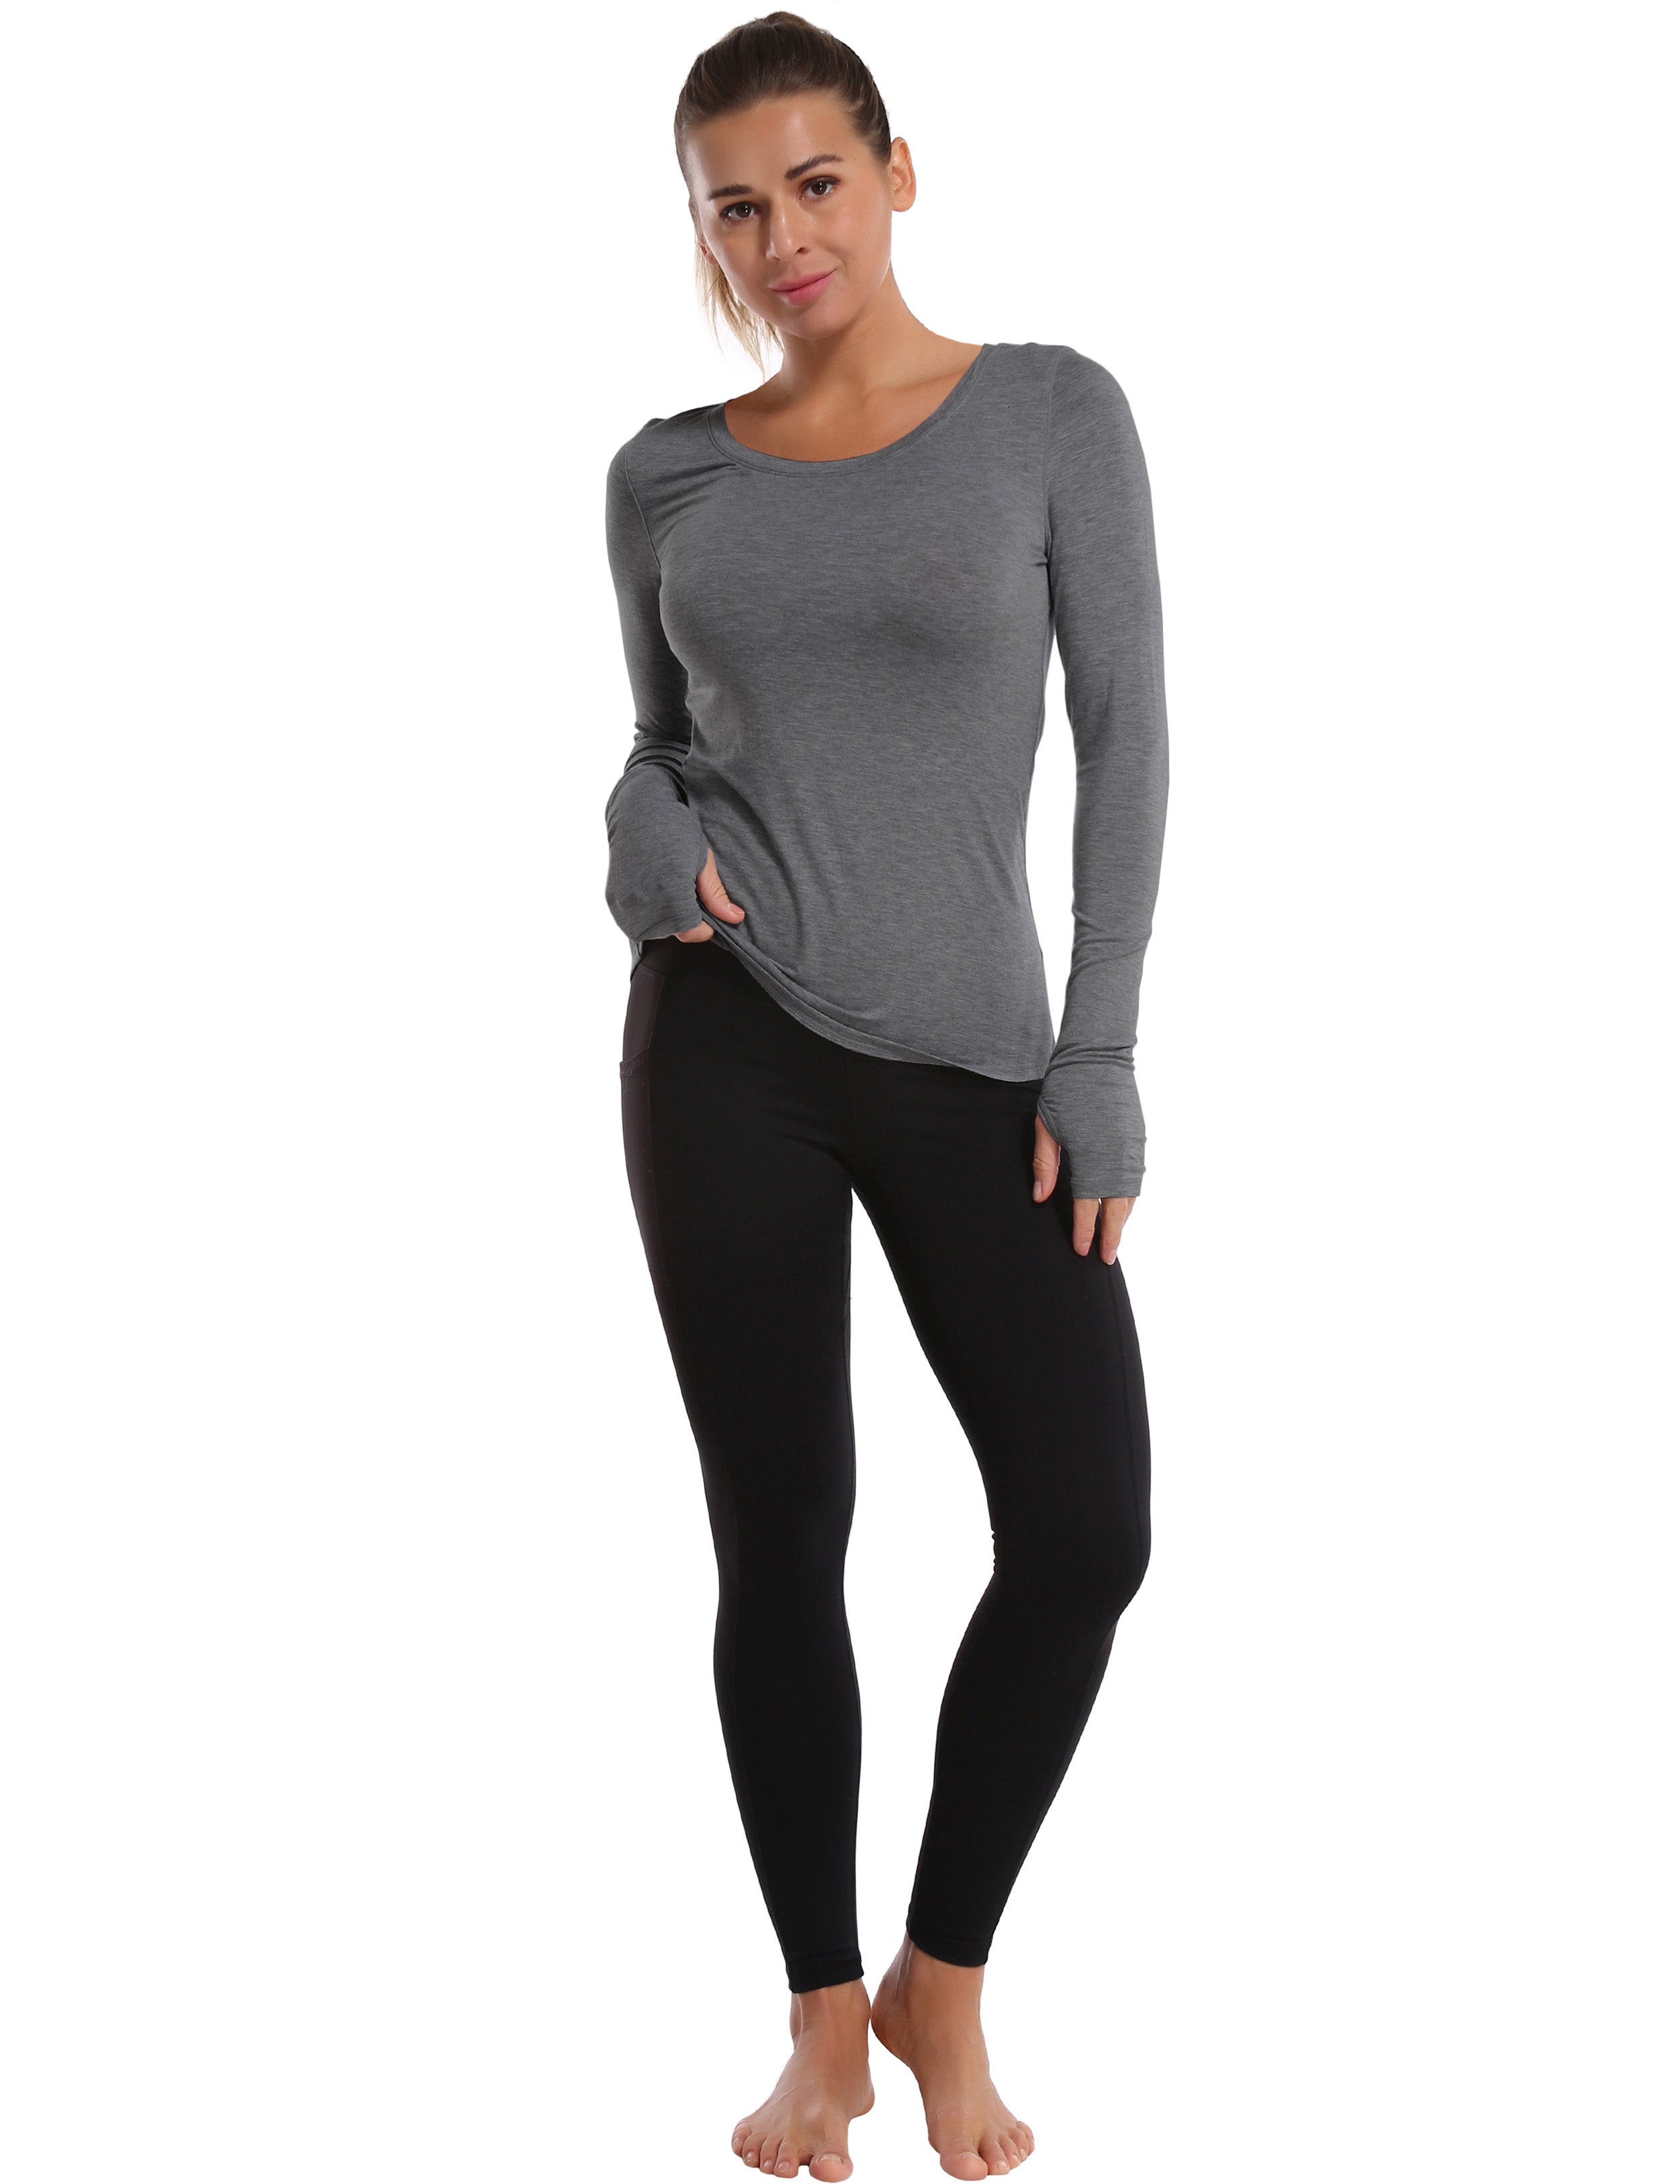 Athlete Long Sleeve Tops heathercharcoal Designed for On the Move Slim fit 93%Modal/7%Spandex Four-way stretch Naturally breathable Super-Soft, Modal Fabric